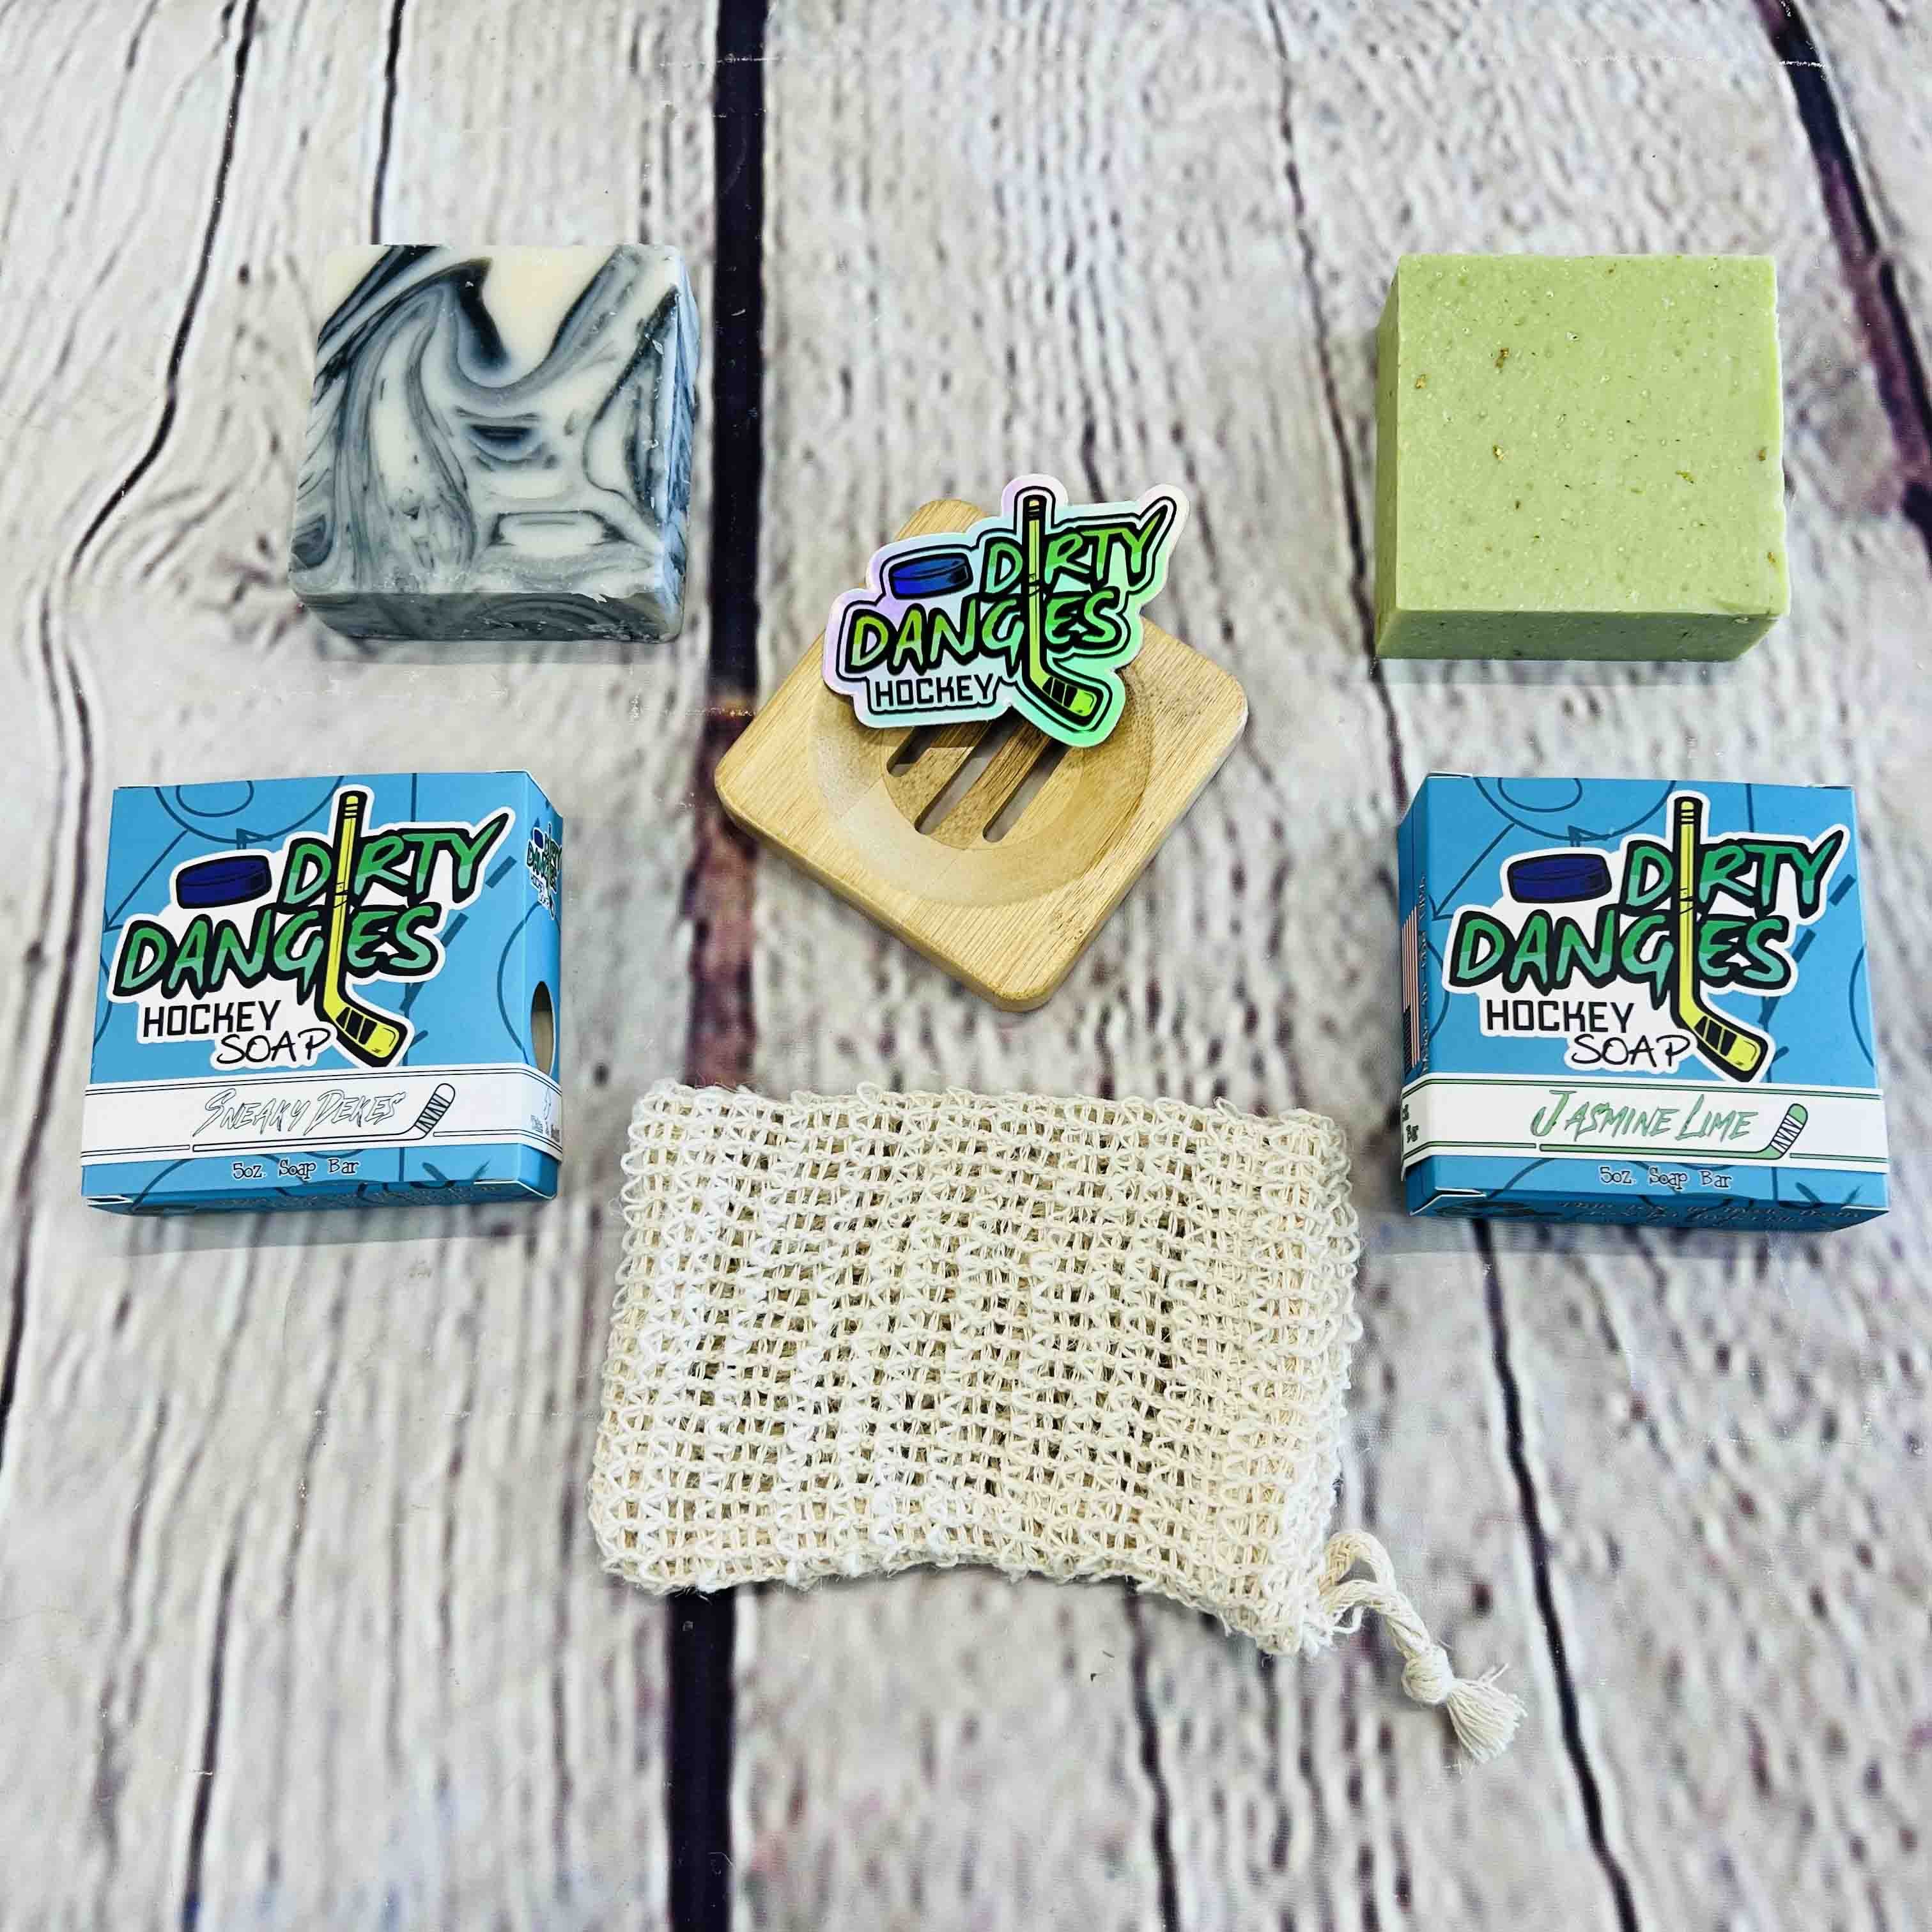 Dirty Dangles Hockey Soap Starter Kit Bundle. A black and white soap bar, sneaky dekes scent, a green soap bar jasmine lime scent, a tan soap bag, a bamboo soap dish and a dirty dangles logo sticker on a wood background.